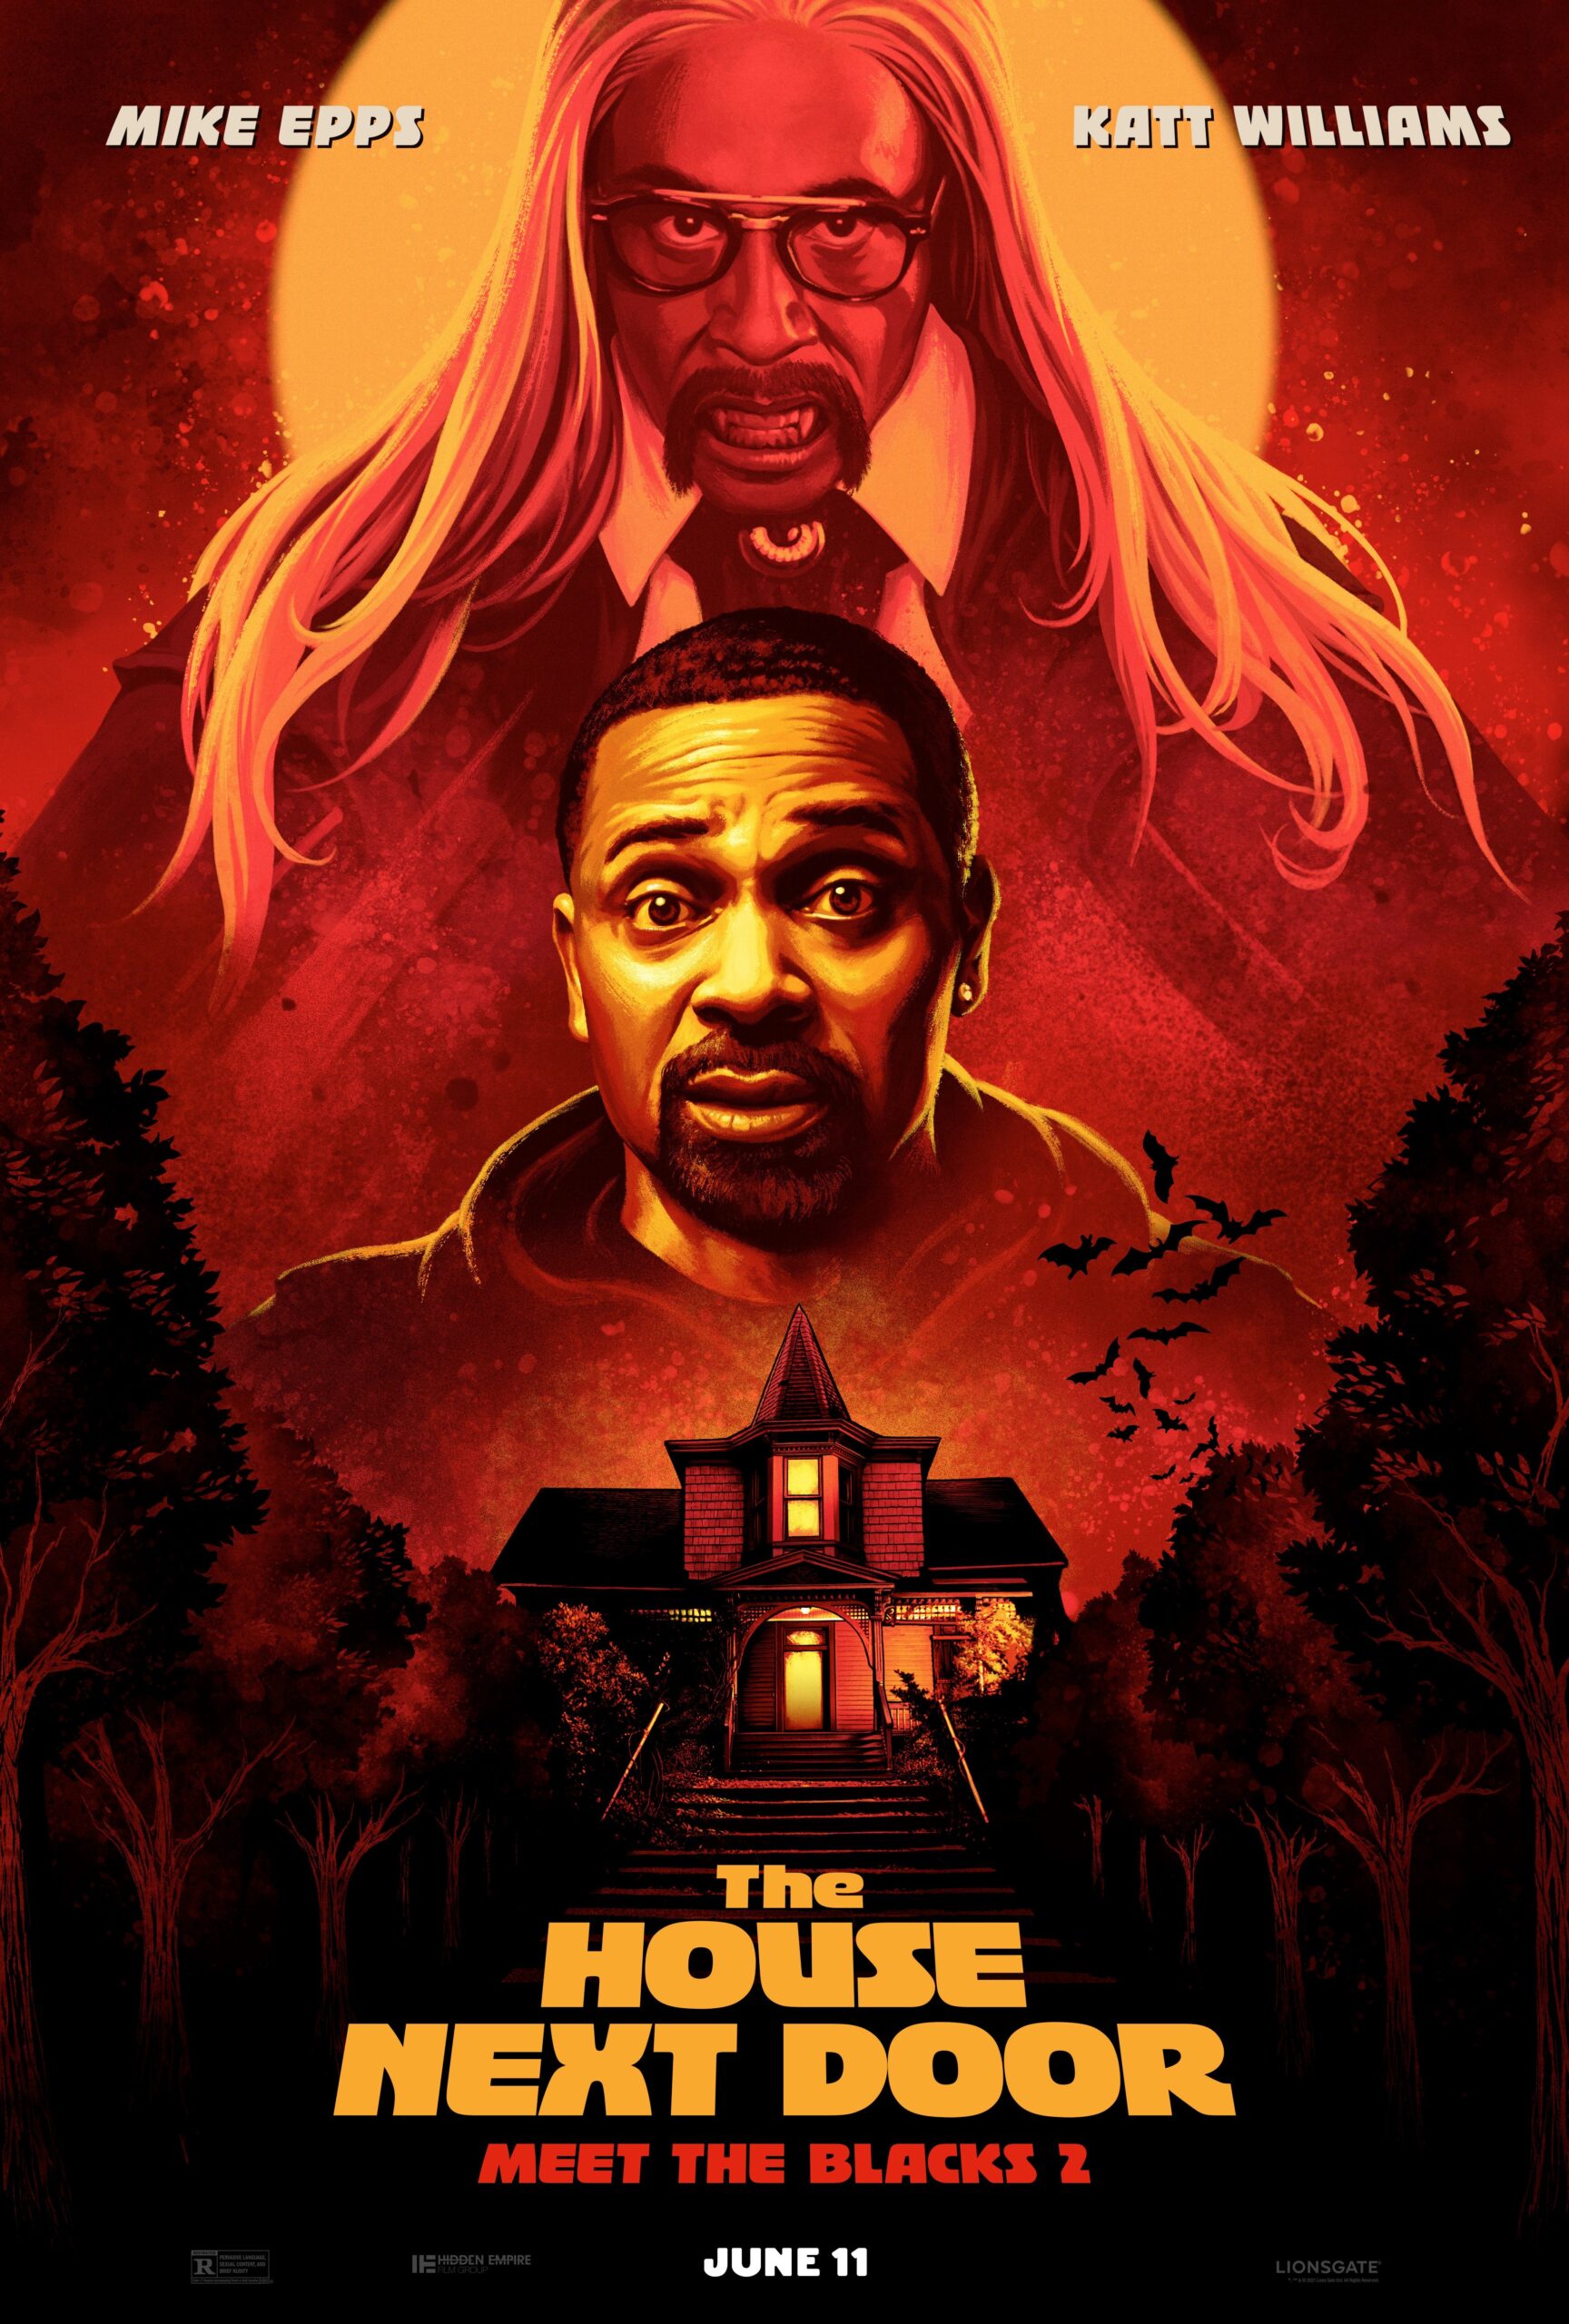 The House Next Door in Theaters June 11th